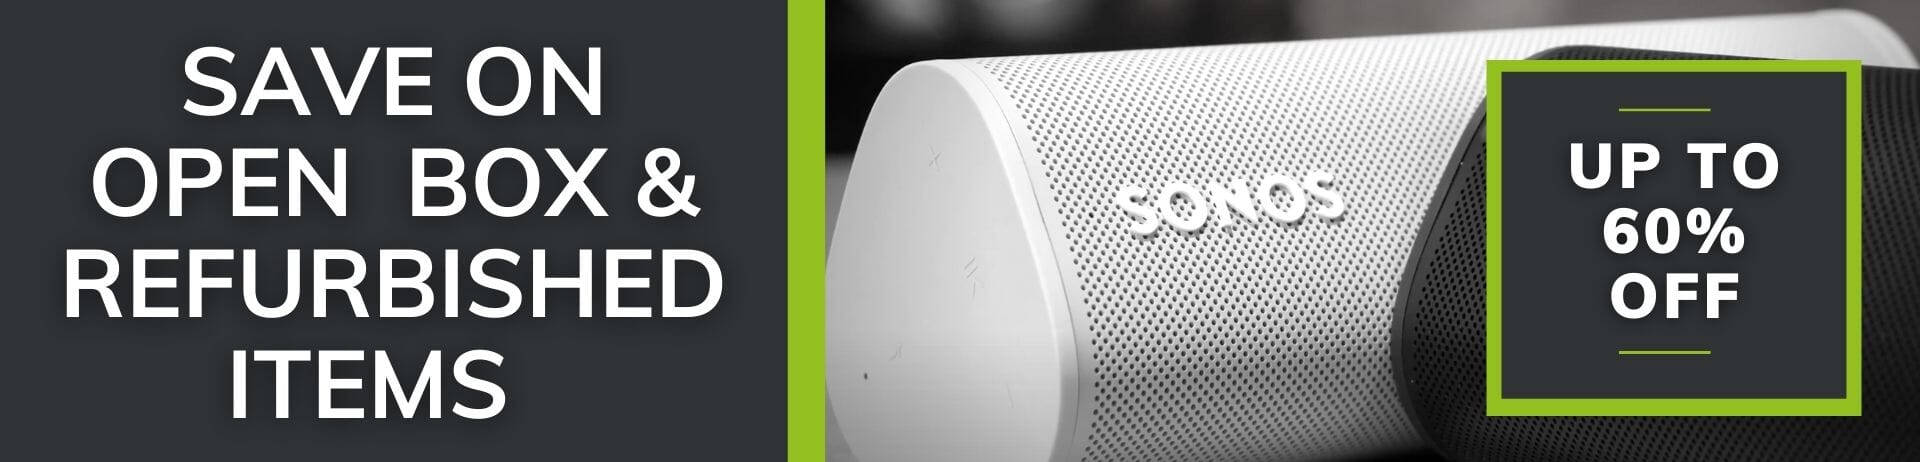 Save on open box and refurbished Sonos products